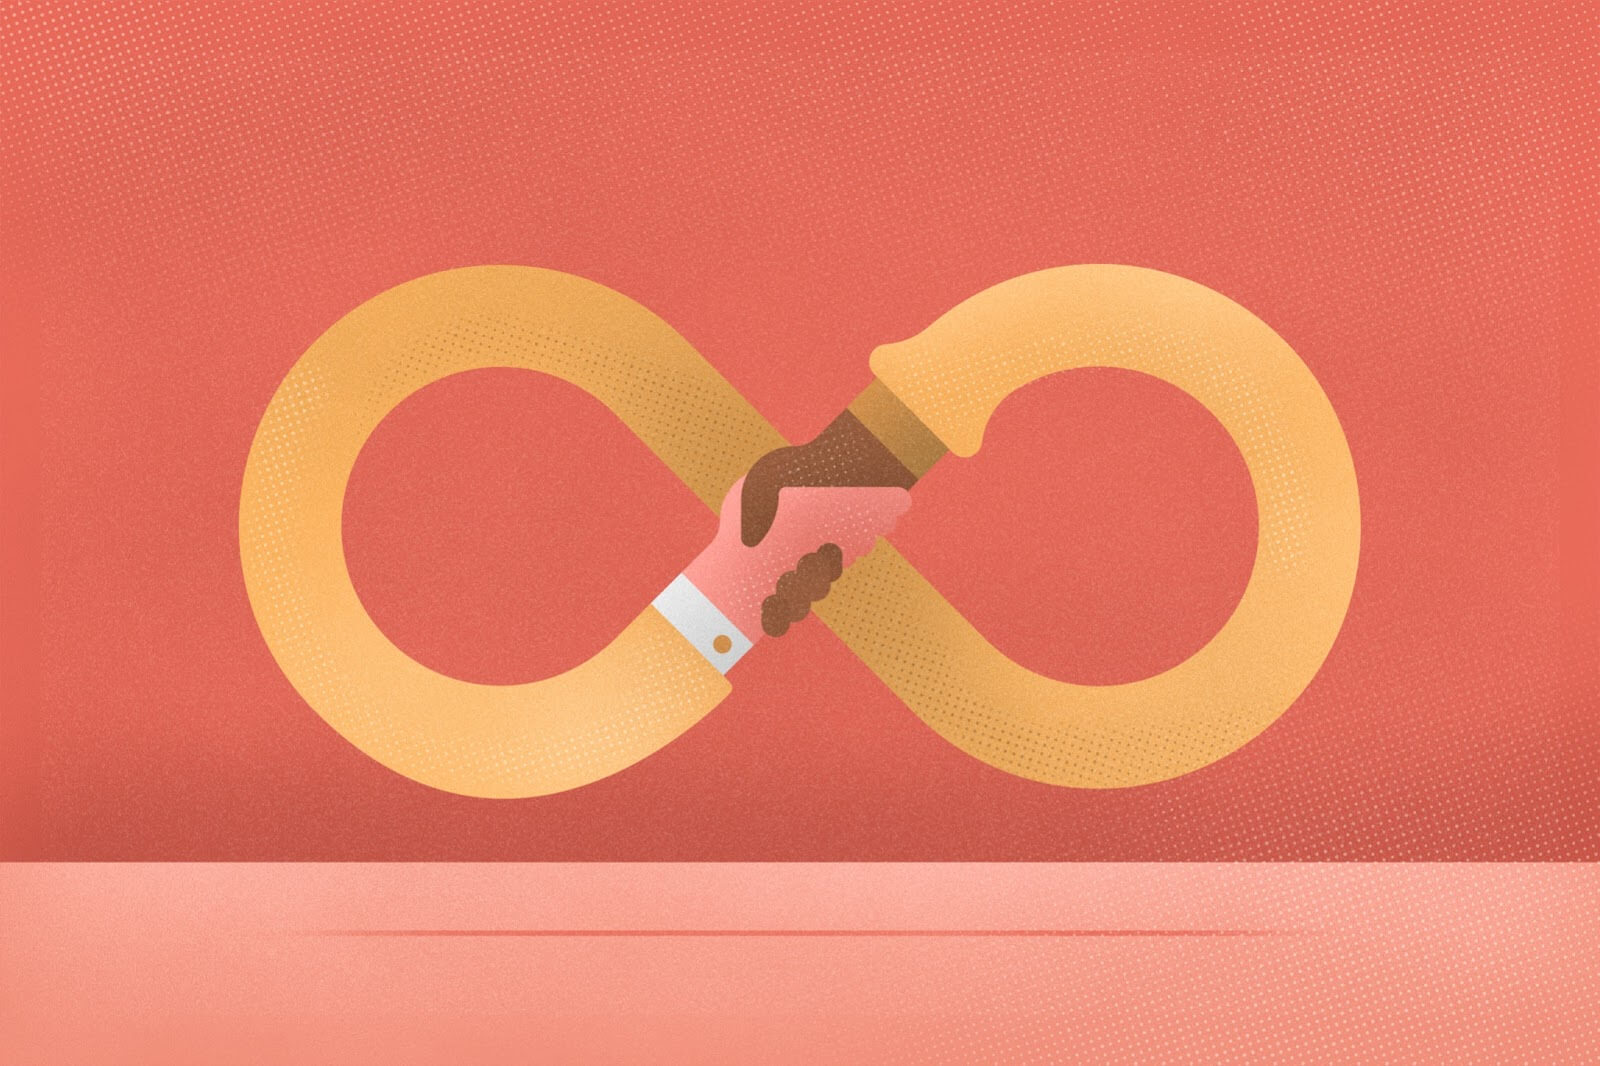 Illustration of Handshakes in an Infinity Symbol - Cookiebot